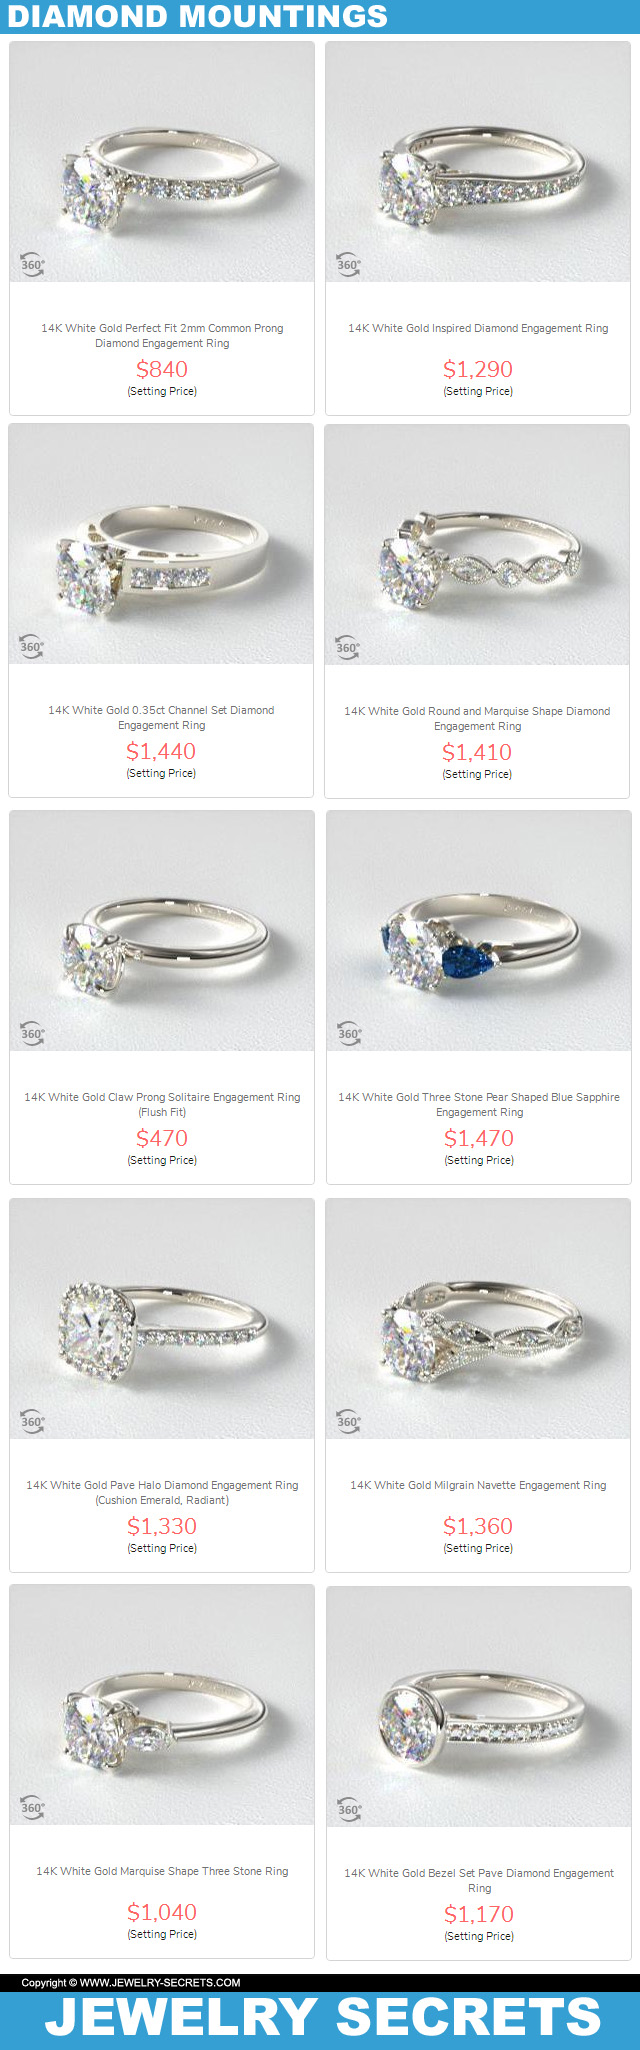 Free Engagement Ring Mounting With This Diamond Purchase